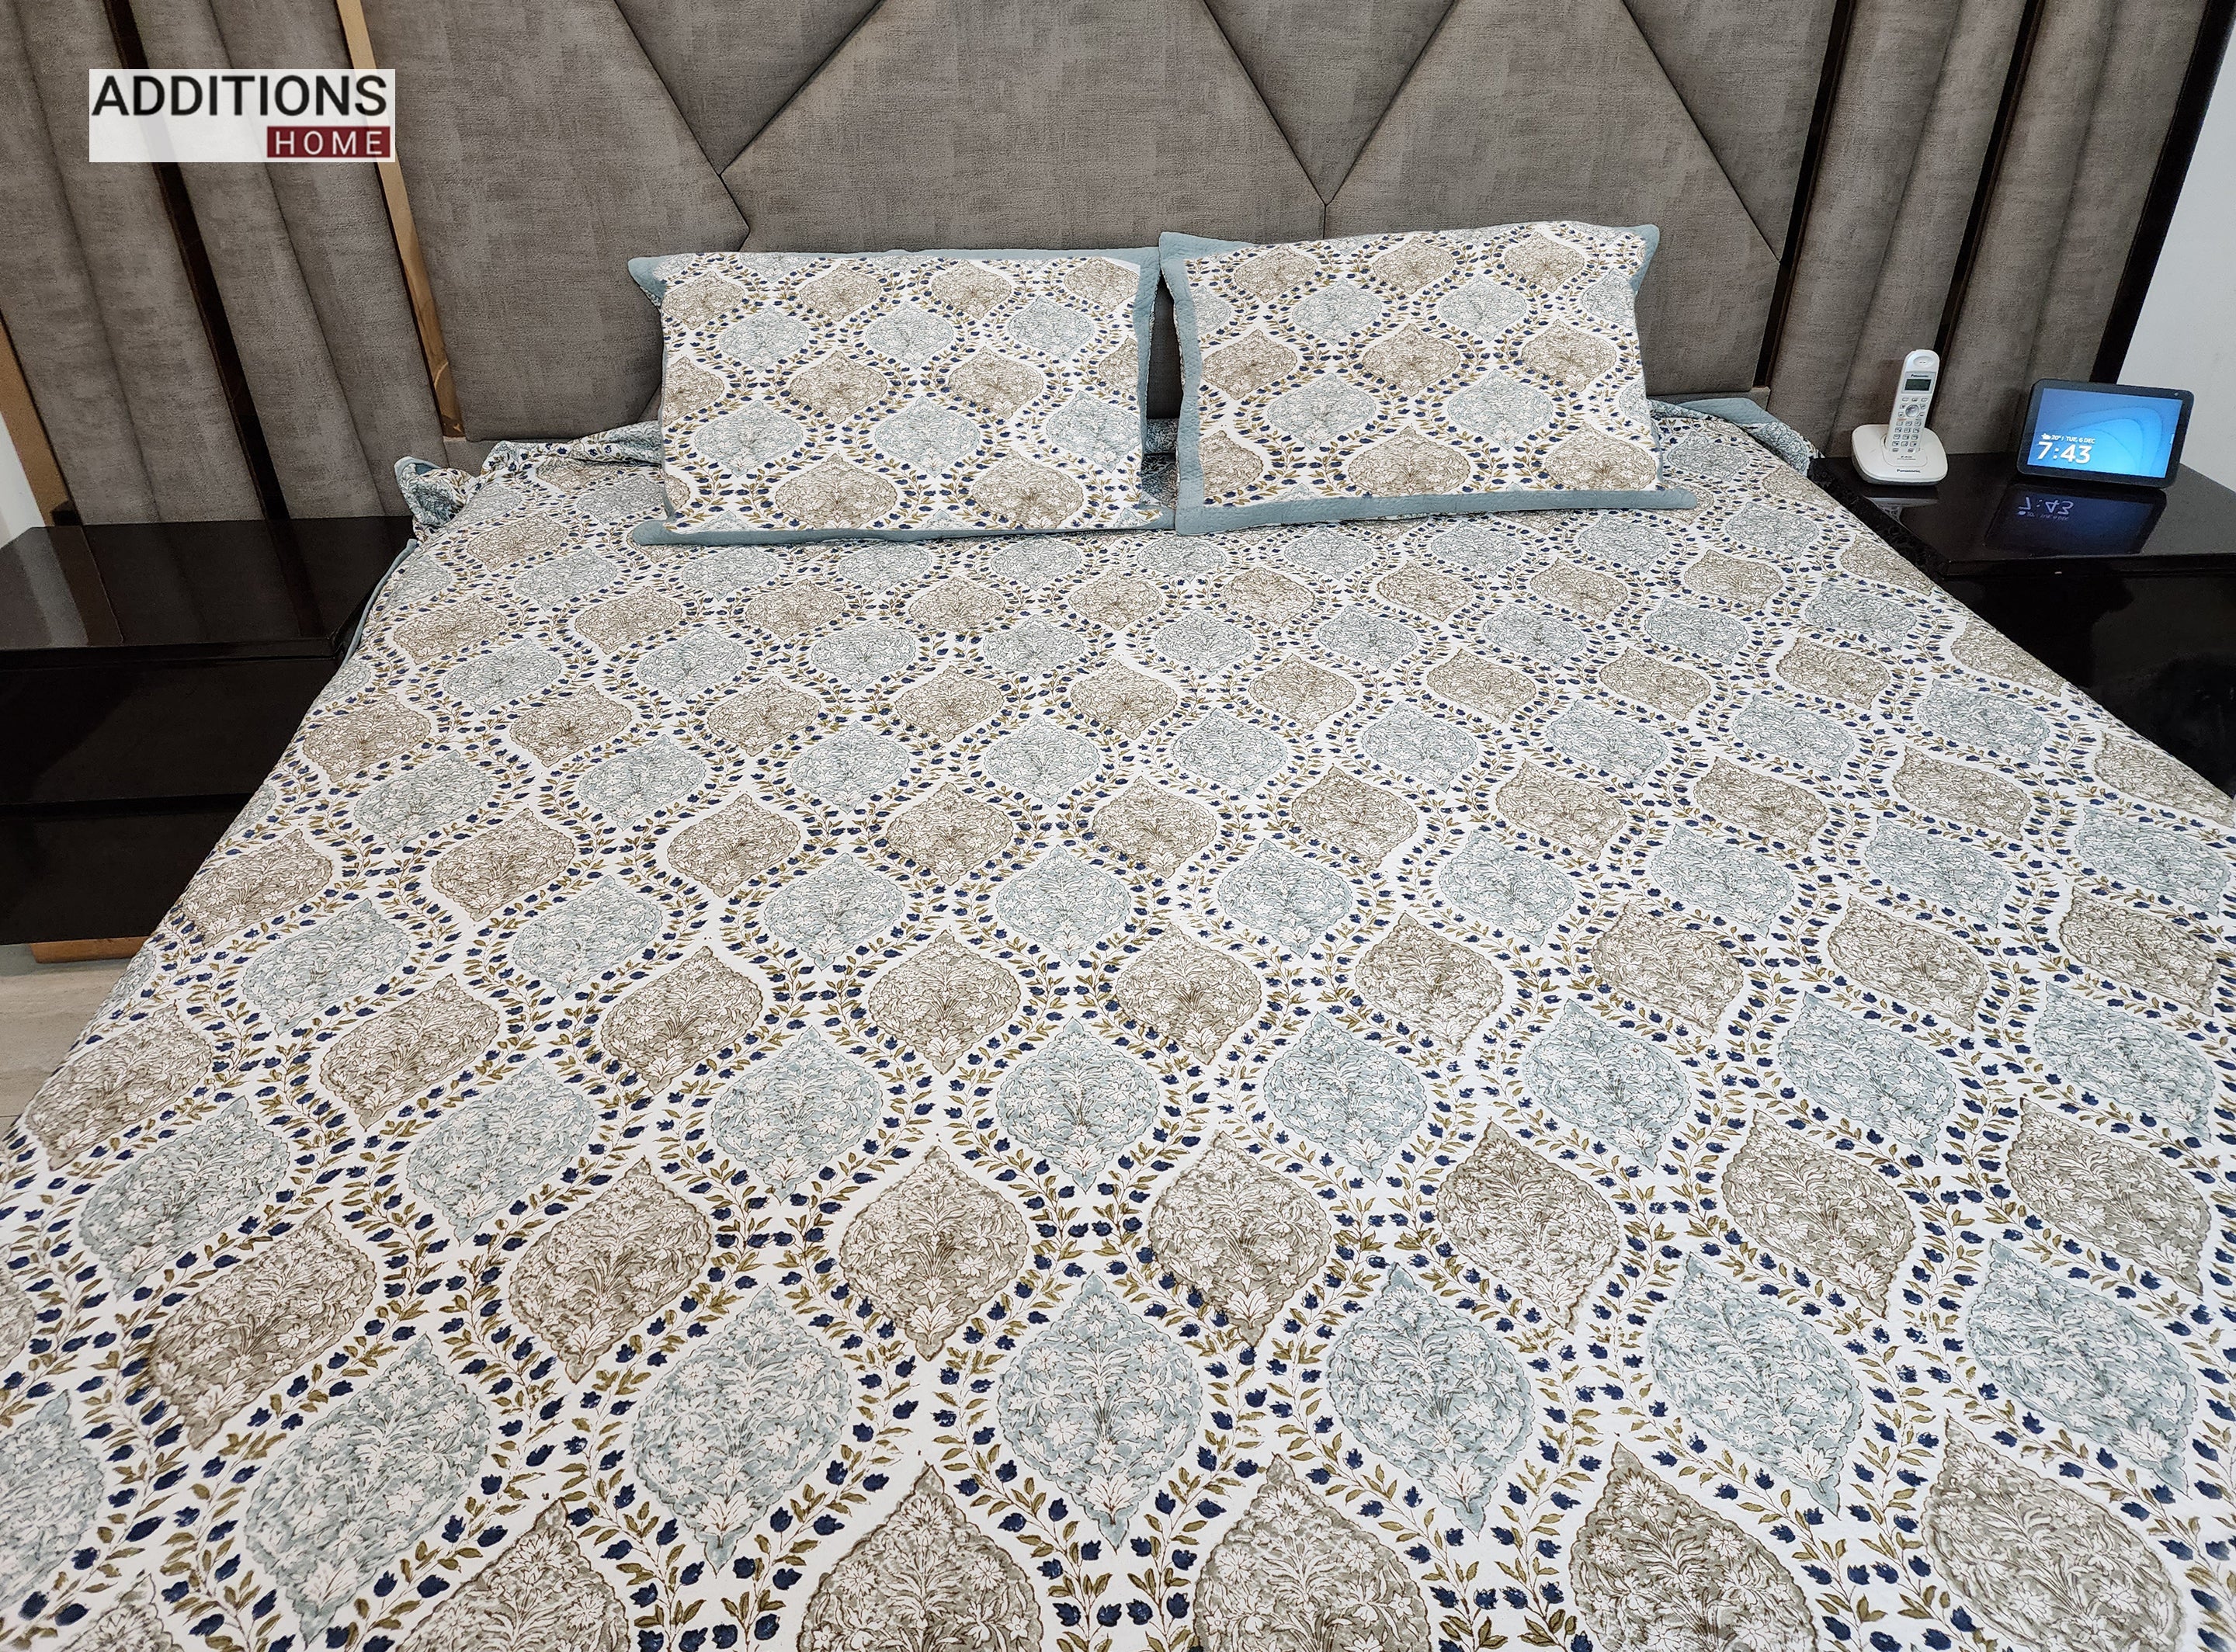 Mysore Hand Block Printed Jacquard Bed Cover with complementing Pillow Covers, 108x108